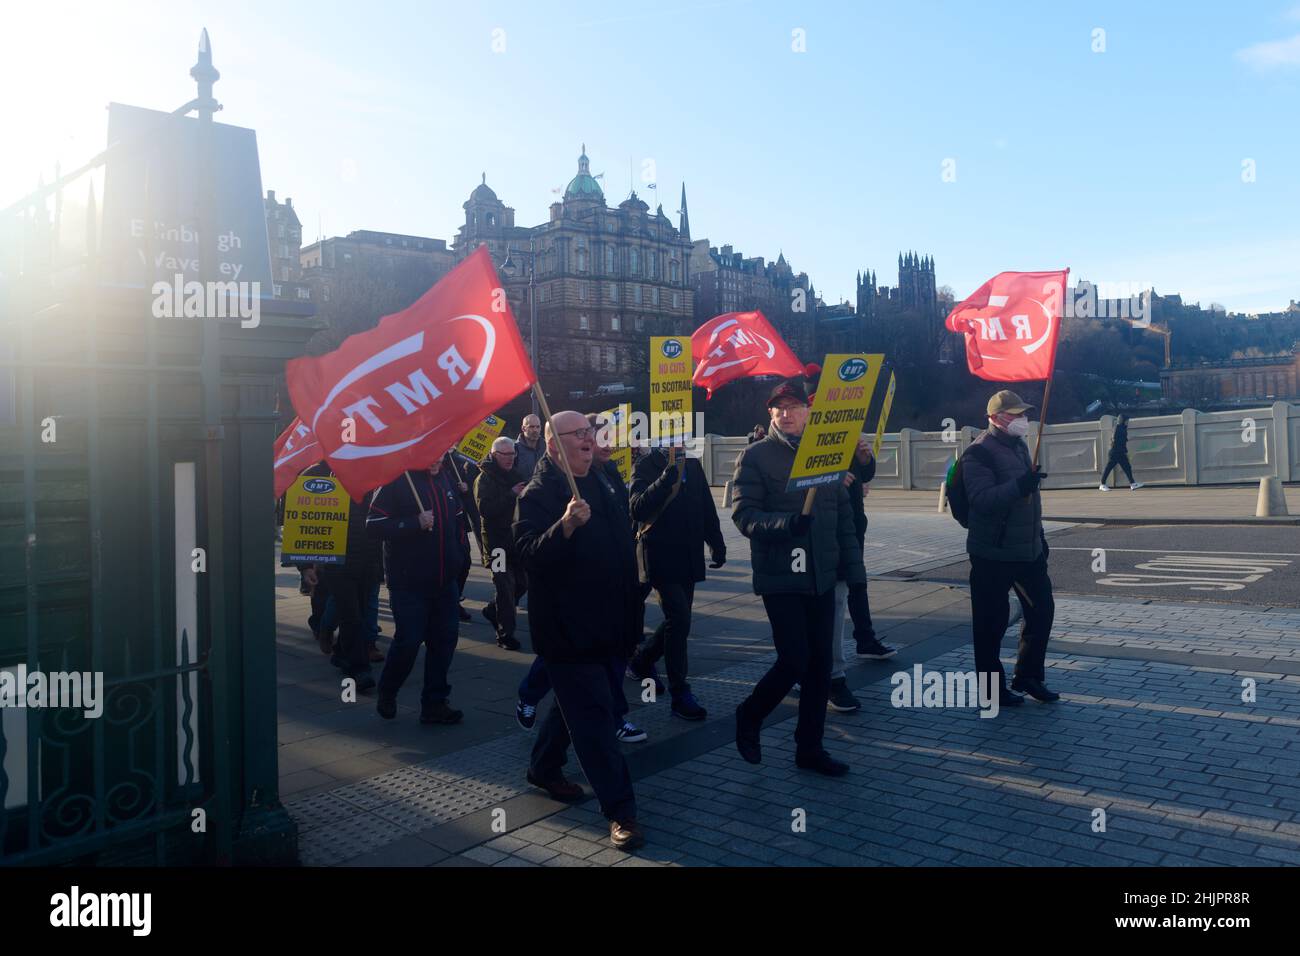 Edinburgh Scotland, UK January 31 2022. RMT Union rail, ferry and energy workers march from Waverley Station to Bute House, the Residence of Scotland’s First Minister to protest at the Scottish Government’s behaviour on a range of issues.  credit sst/alamy live news Stock Photo